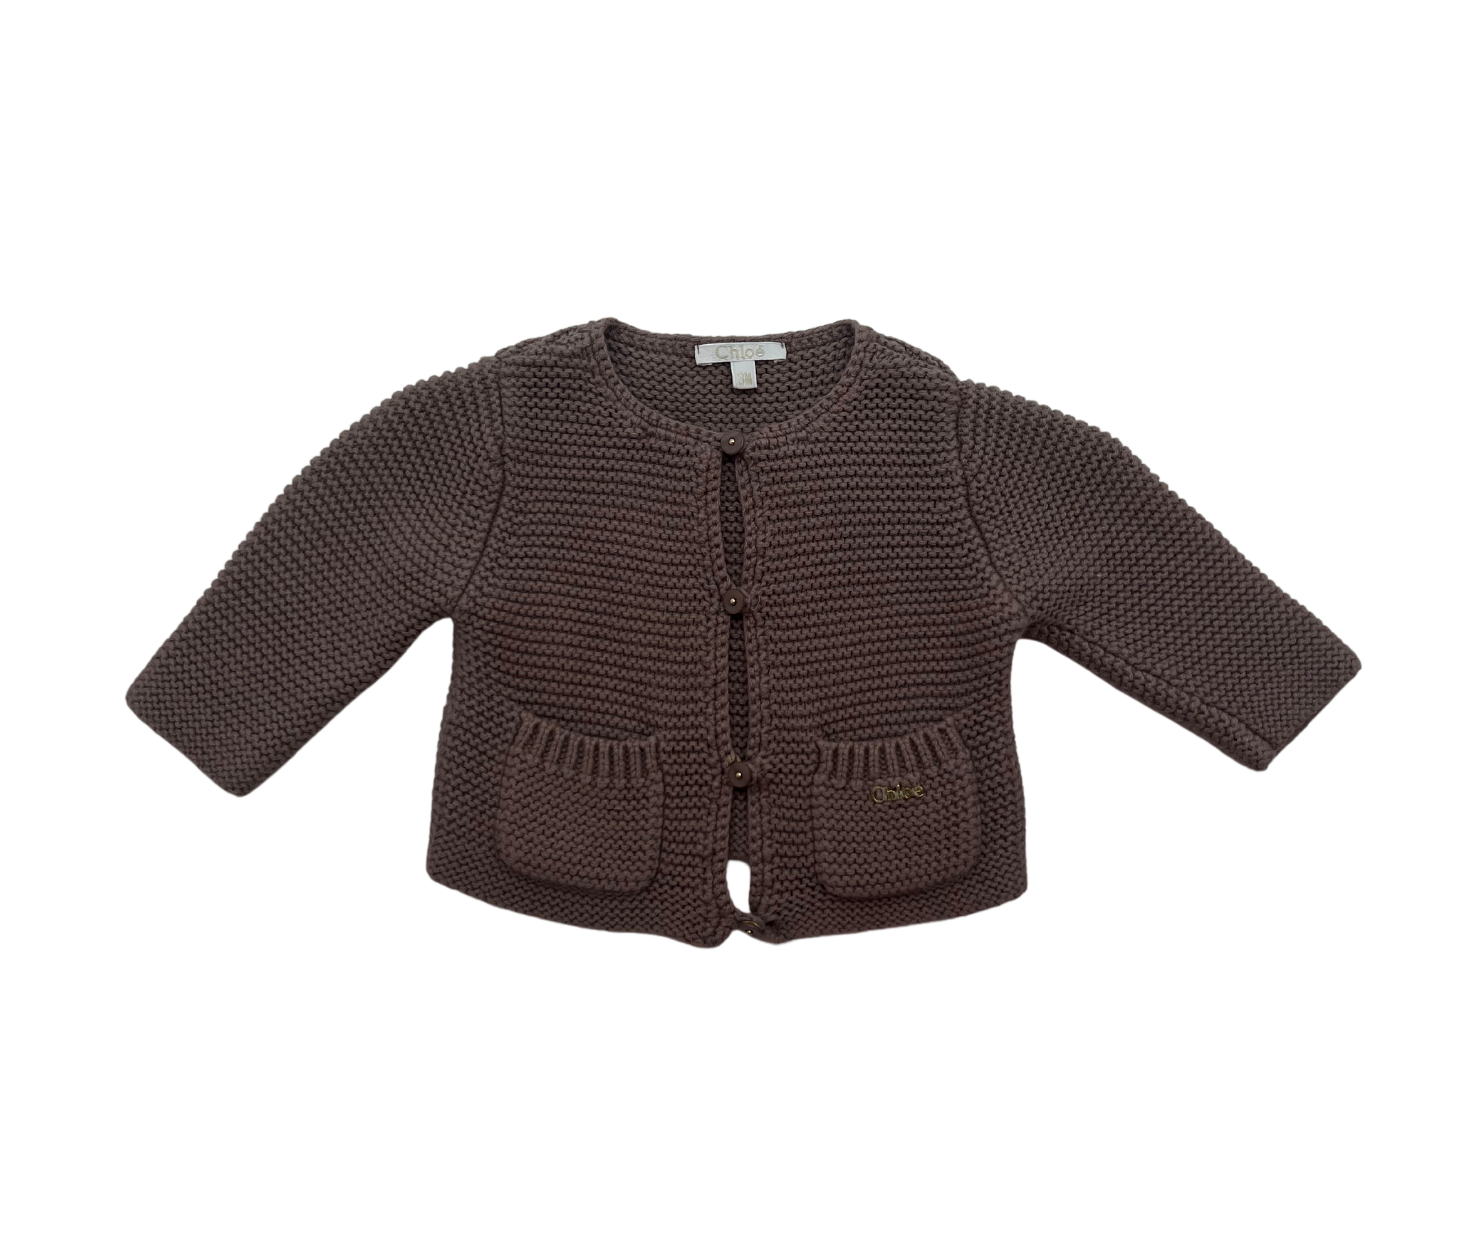 CHLOÉ - Brown sweater - 3 months